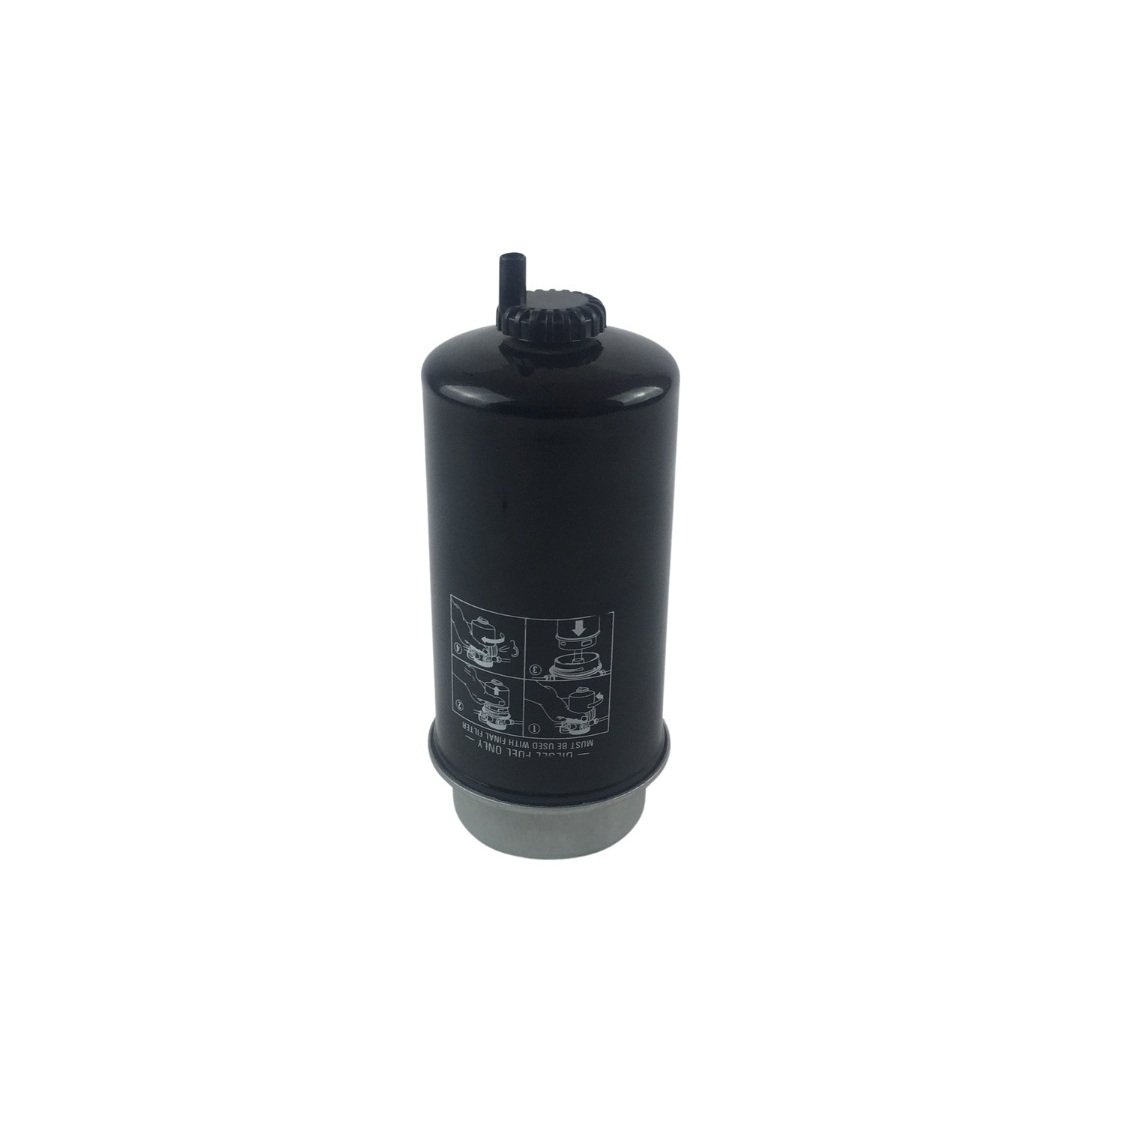 Fuel Filter Reference: S RE508633 FIL Suitable For Agricultural Machinery